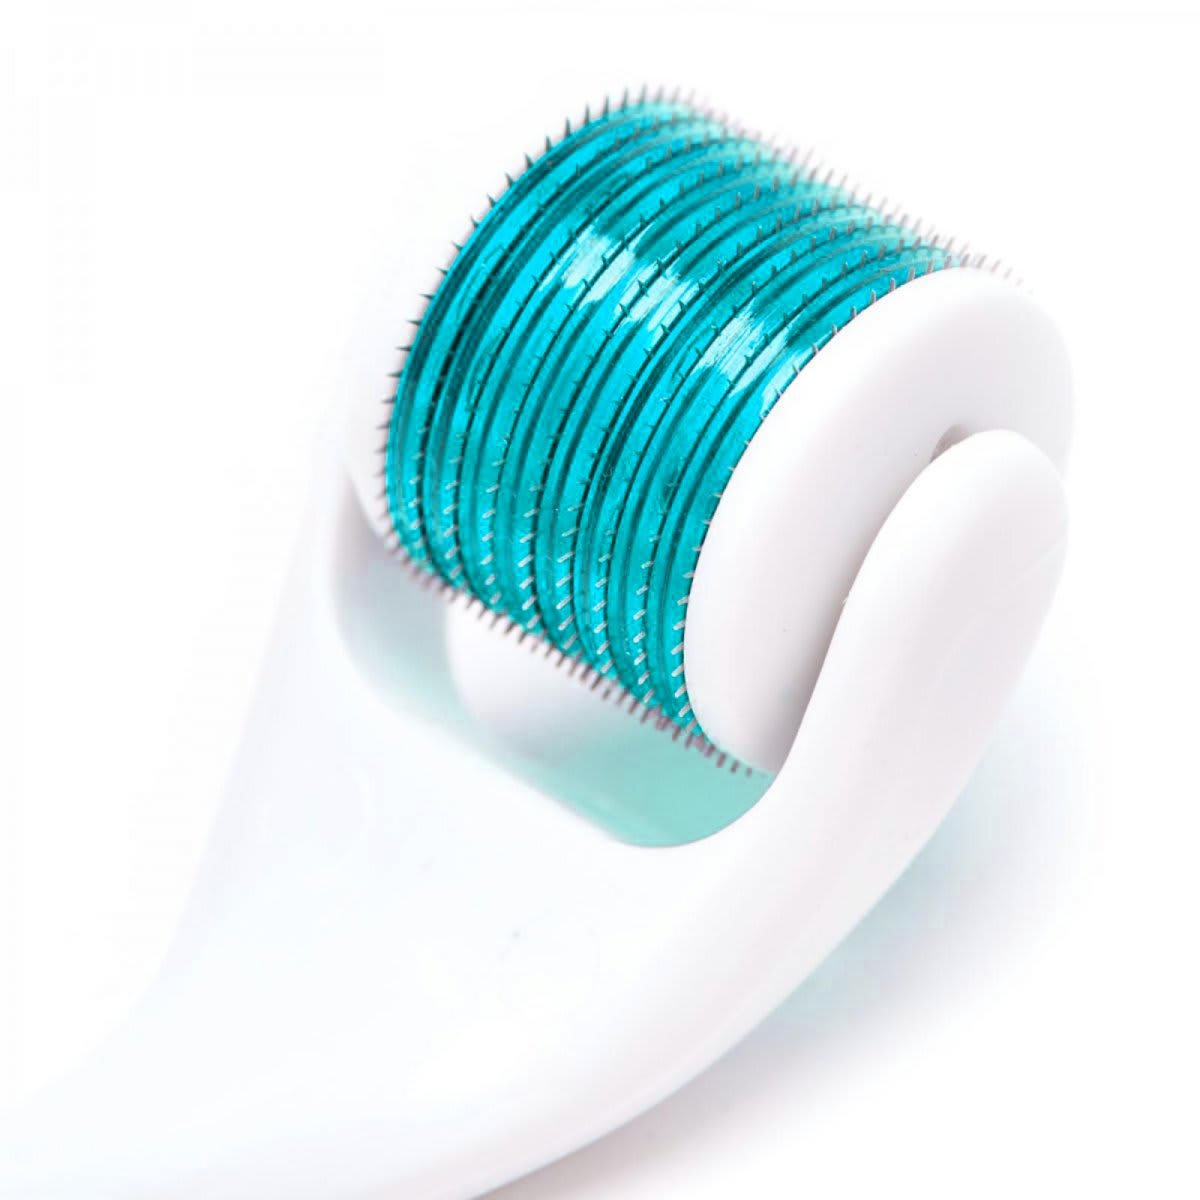 Greater Hair Micro Needle Roller - Scalp 0.24 mm